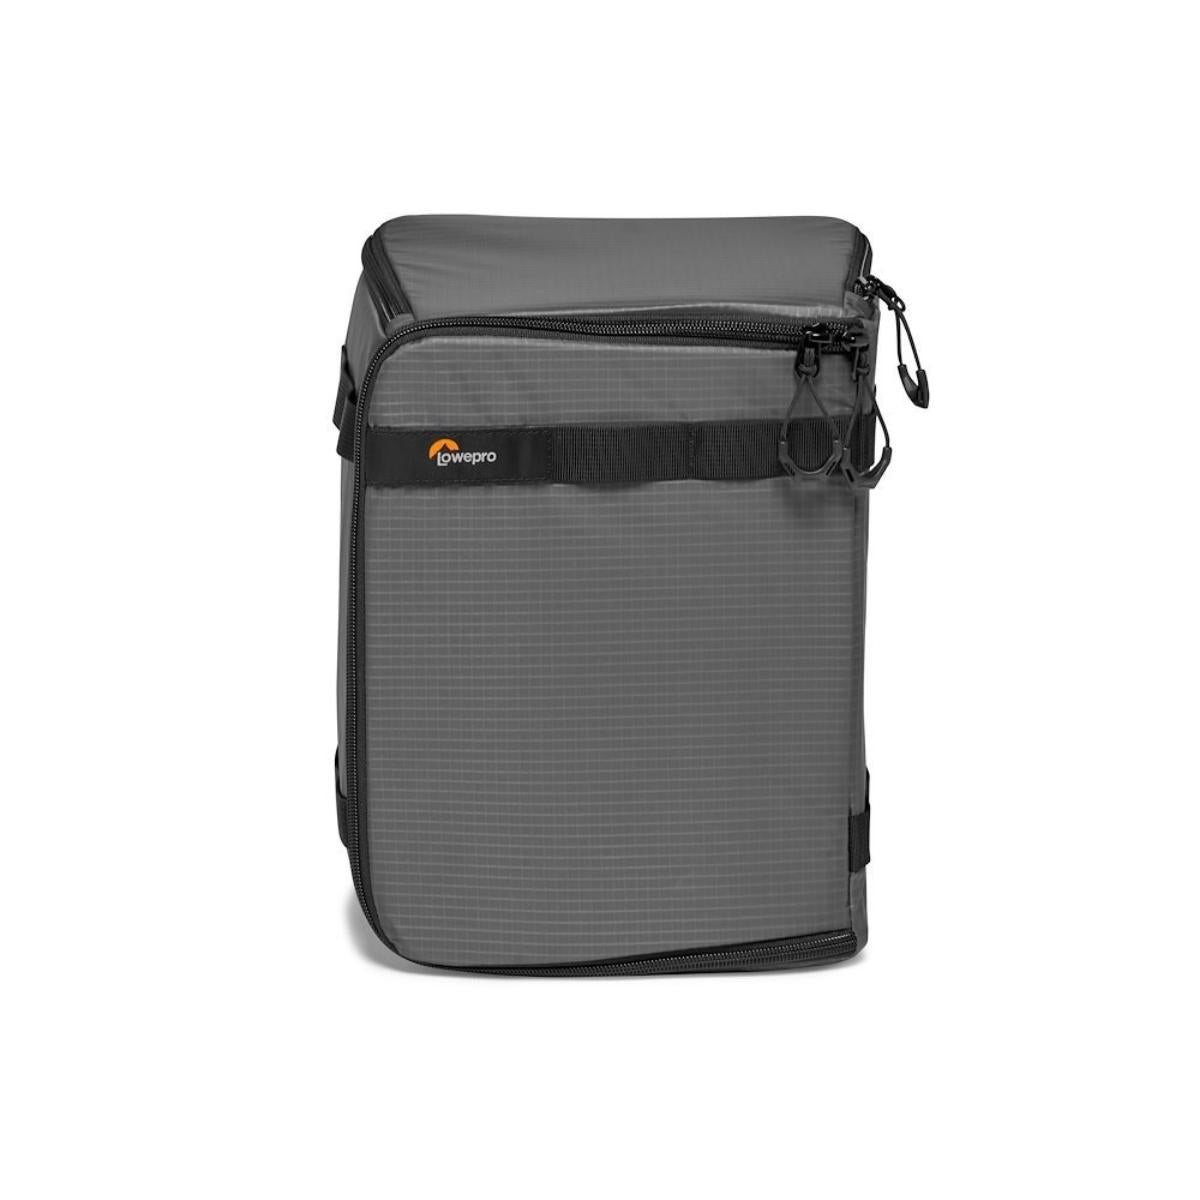 Lowepro GearUp PRO 5L / 8L DSLR & Mirrorless Camera Compartment Box with Adjustable Dividers Travel Bag (Large, XL)